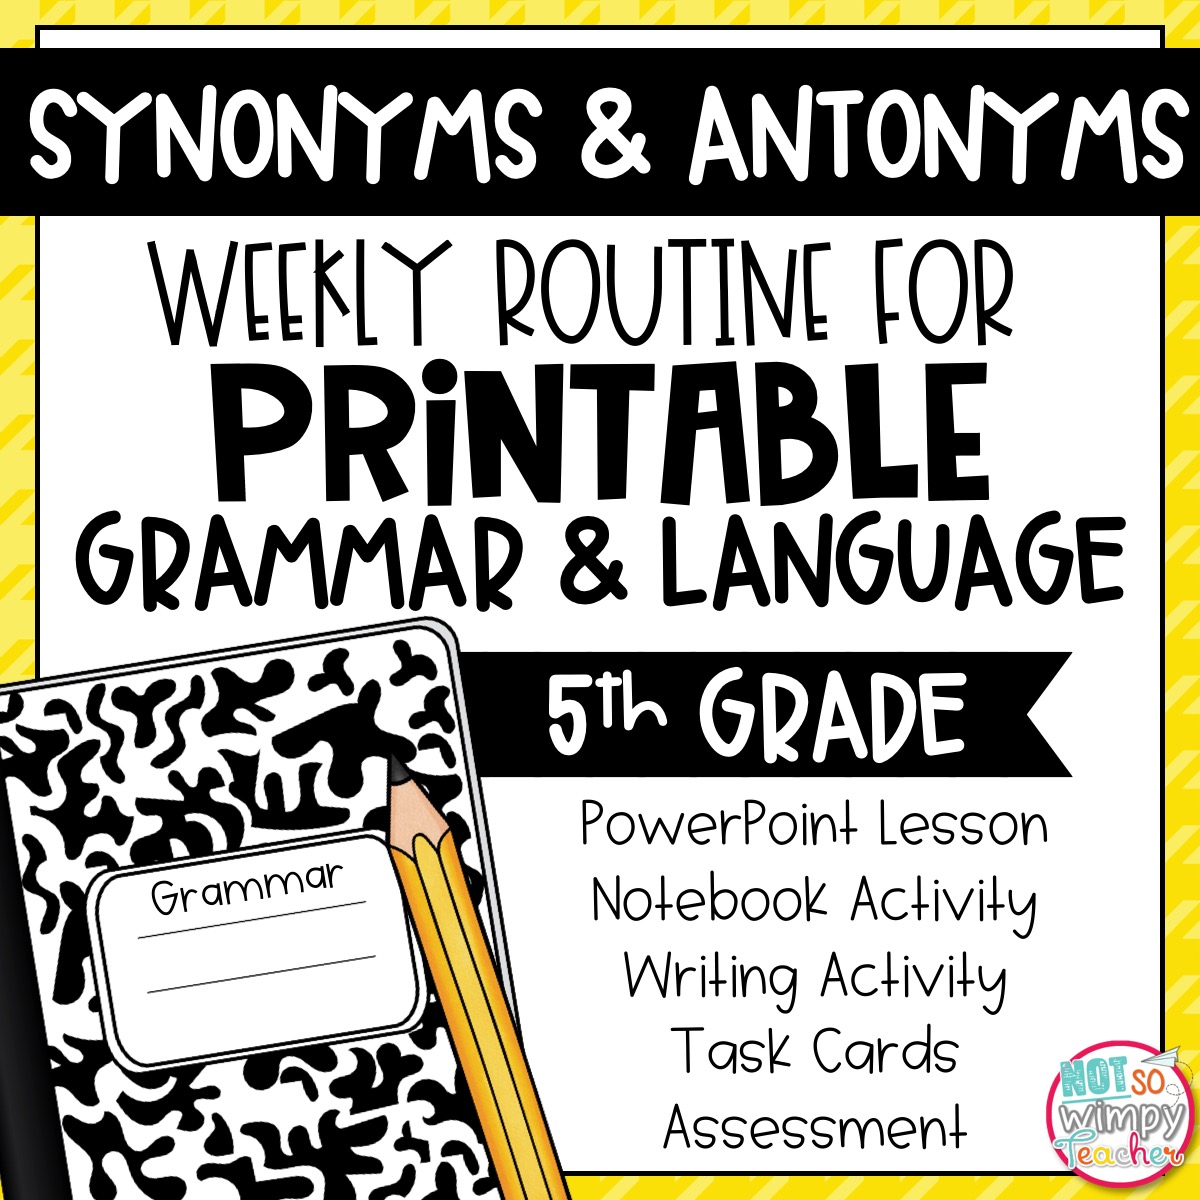 See You Again Synonyms & Antonyms